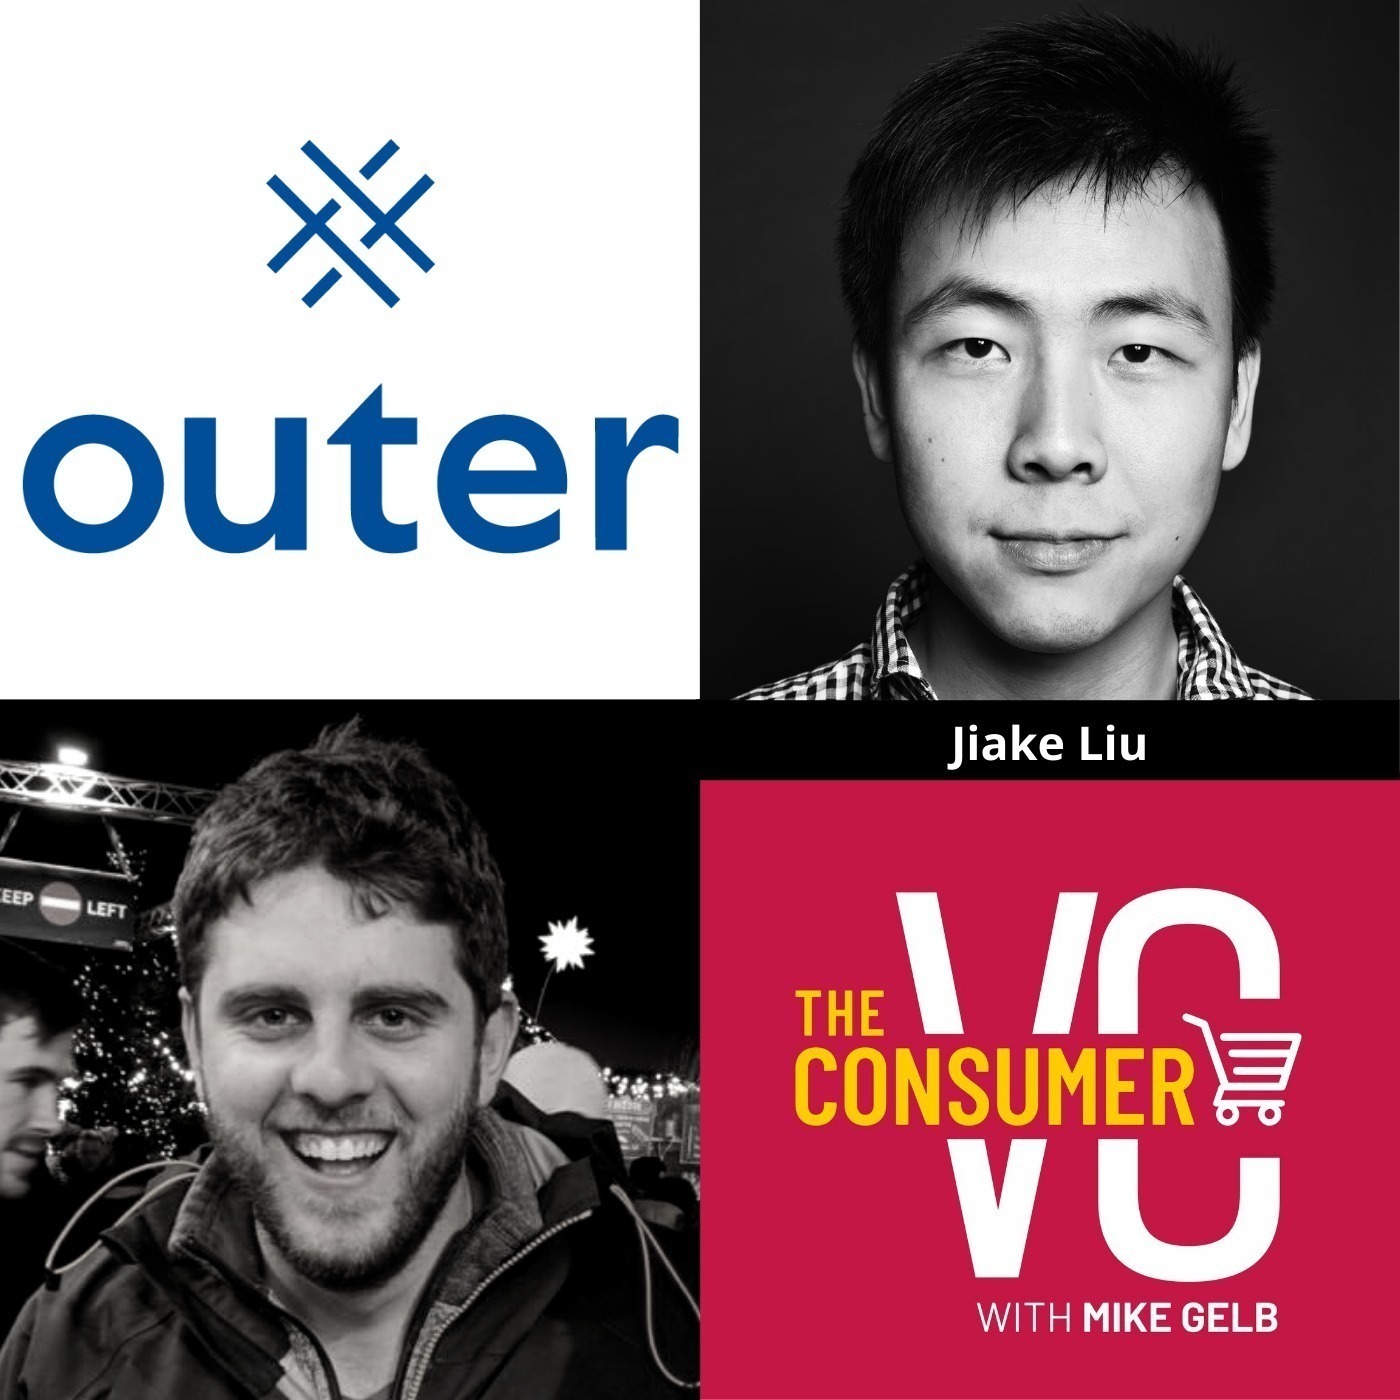 Jiake Liu (Outer) - How Outer Became The Fastest Growing DNVB In The US, His Approach to Showrooms, and Why You Can't Rely On "Build It and They Will Come"